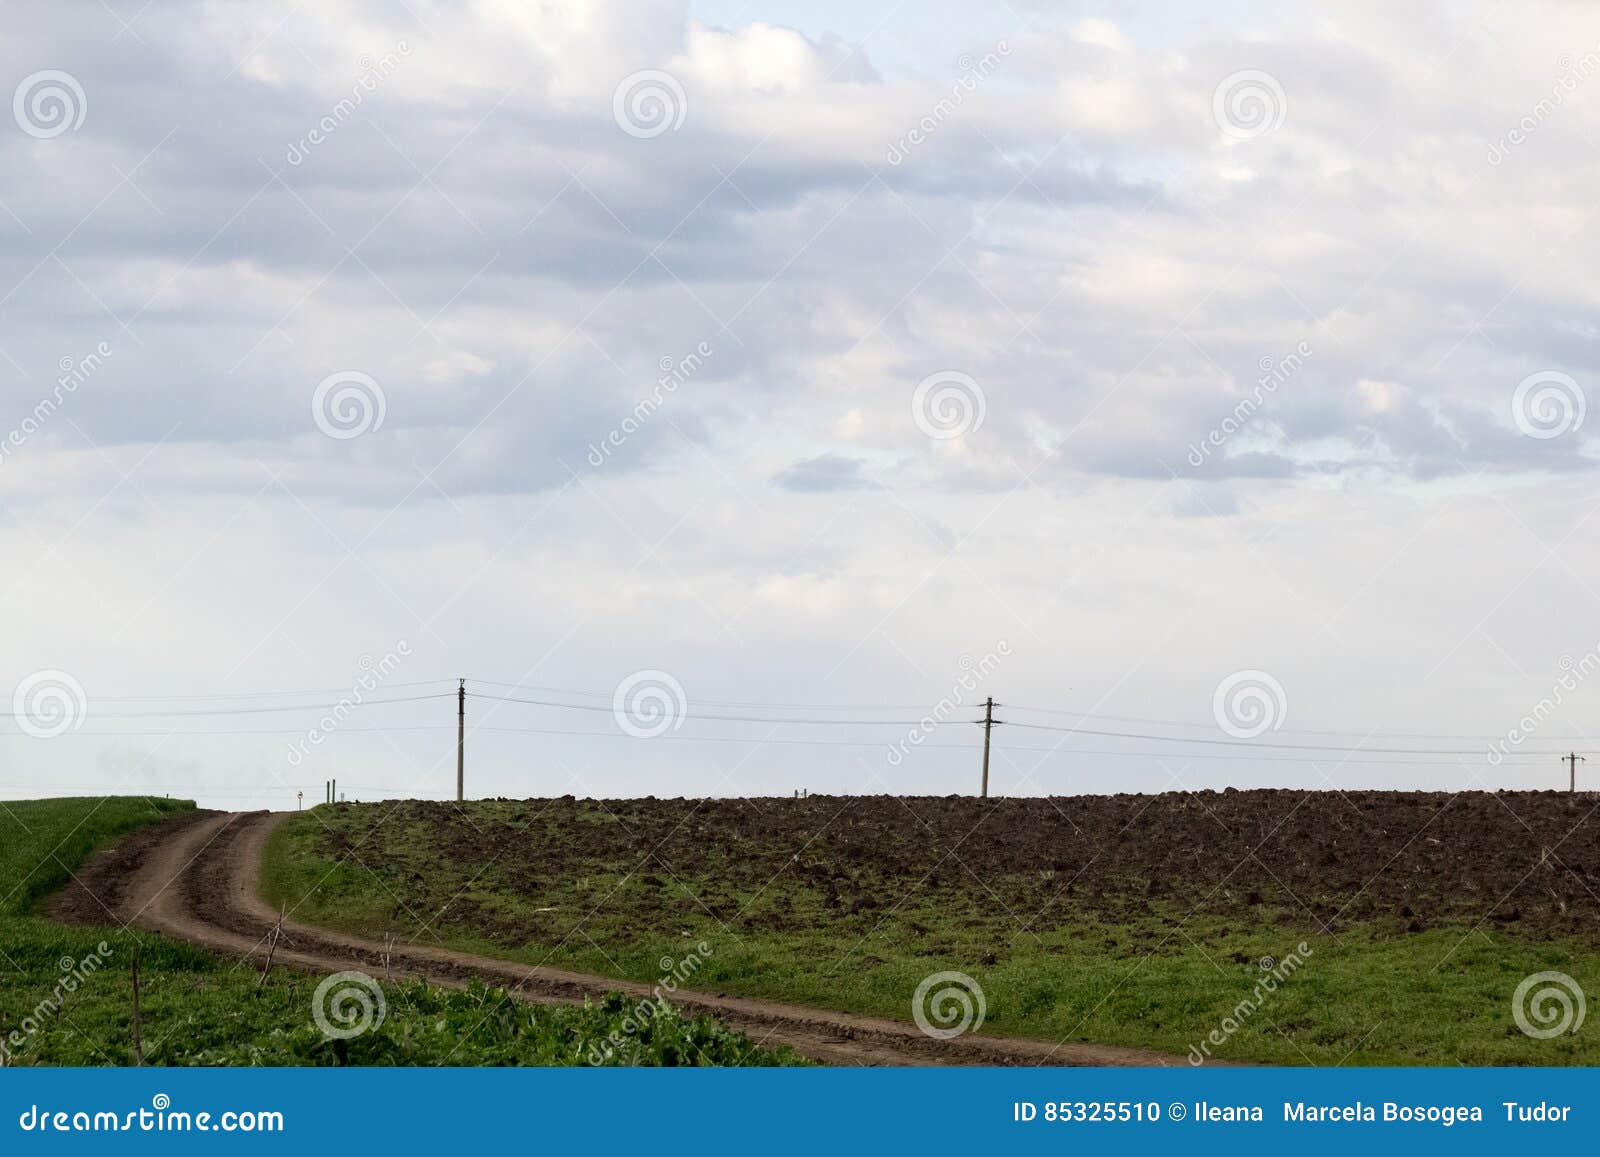 rural landscape with green fields, soil texture and slops